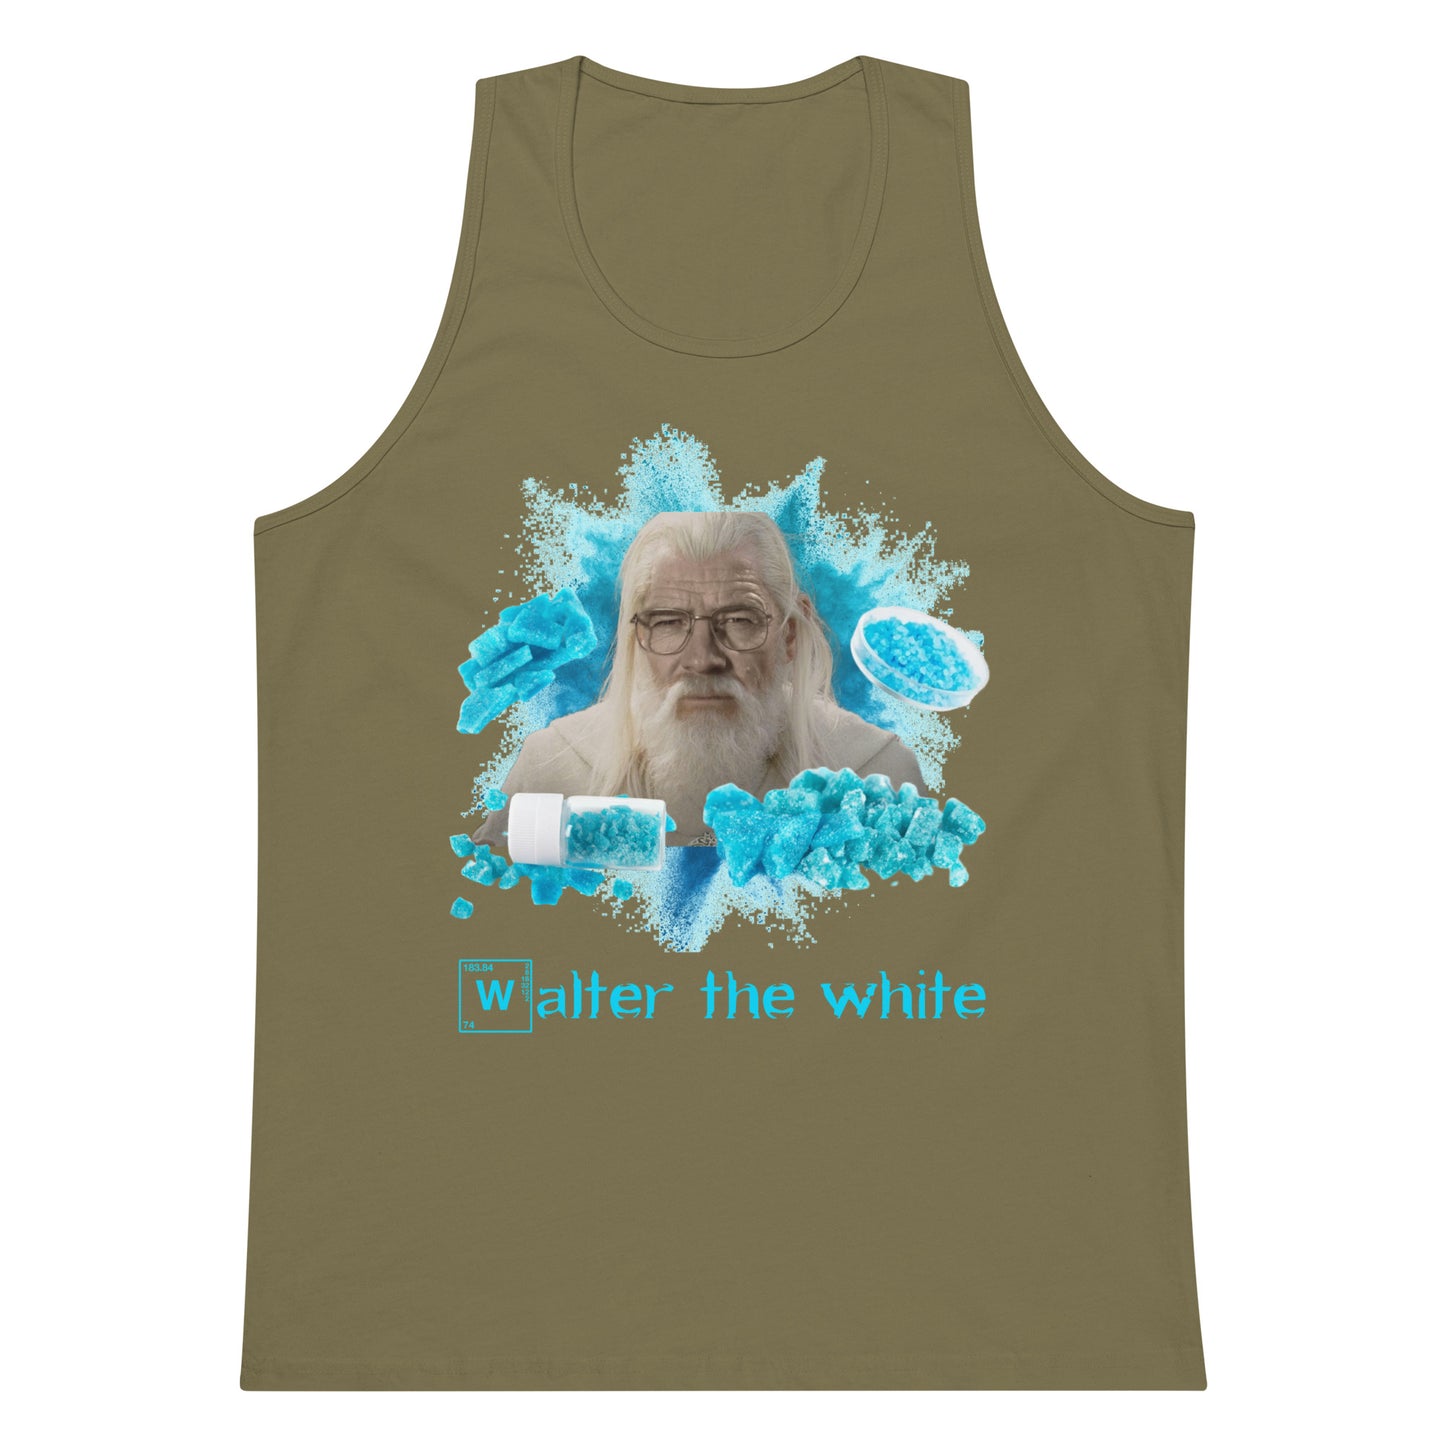 Walter the White (tank top)